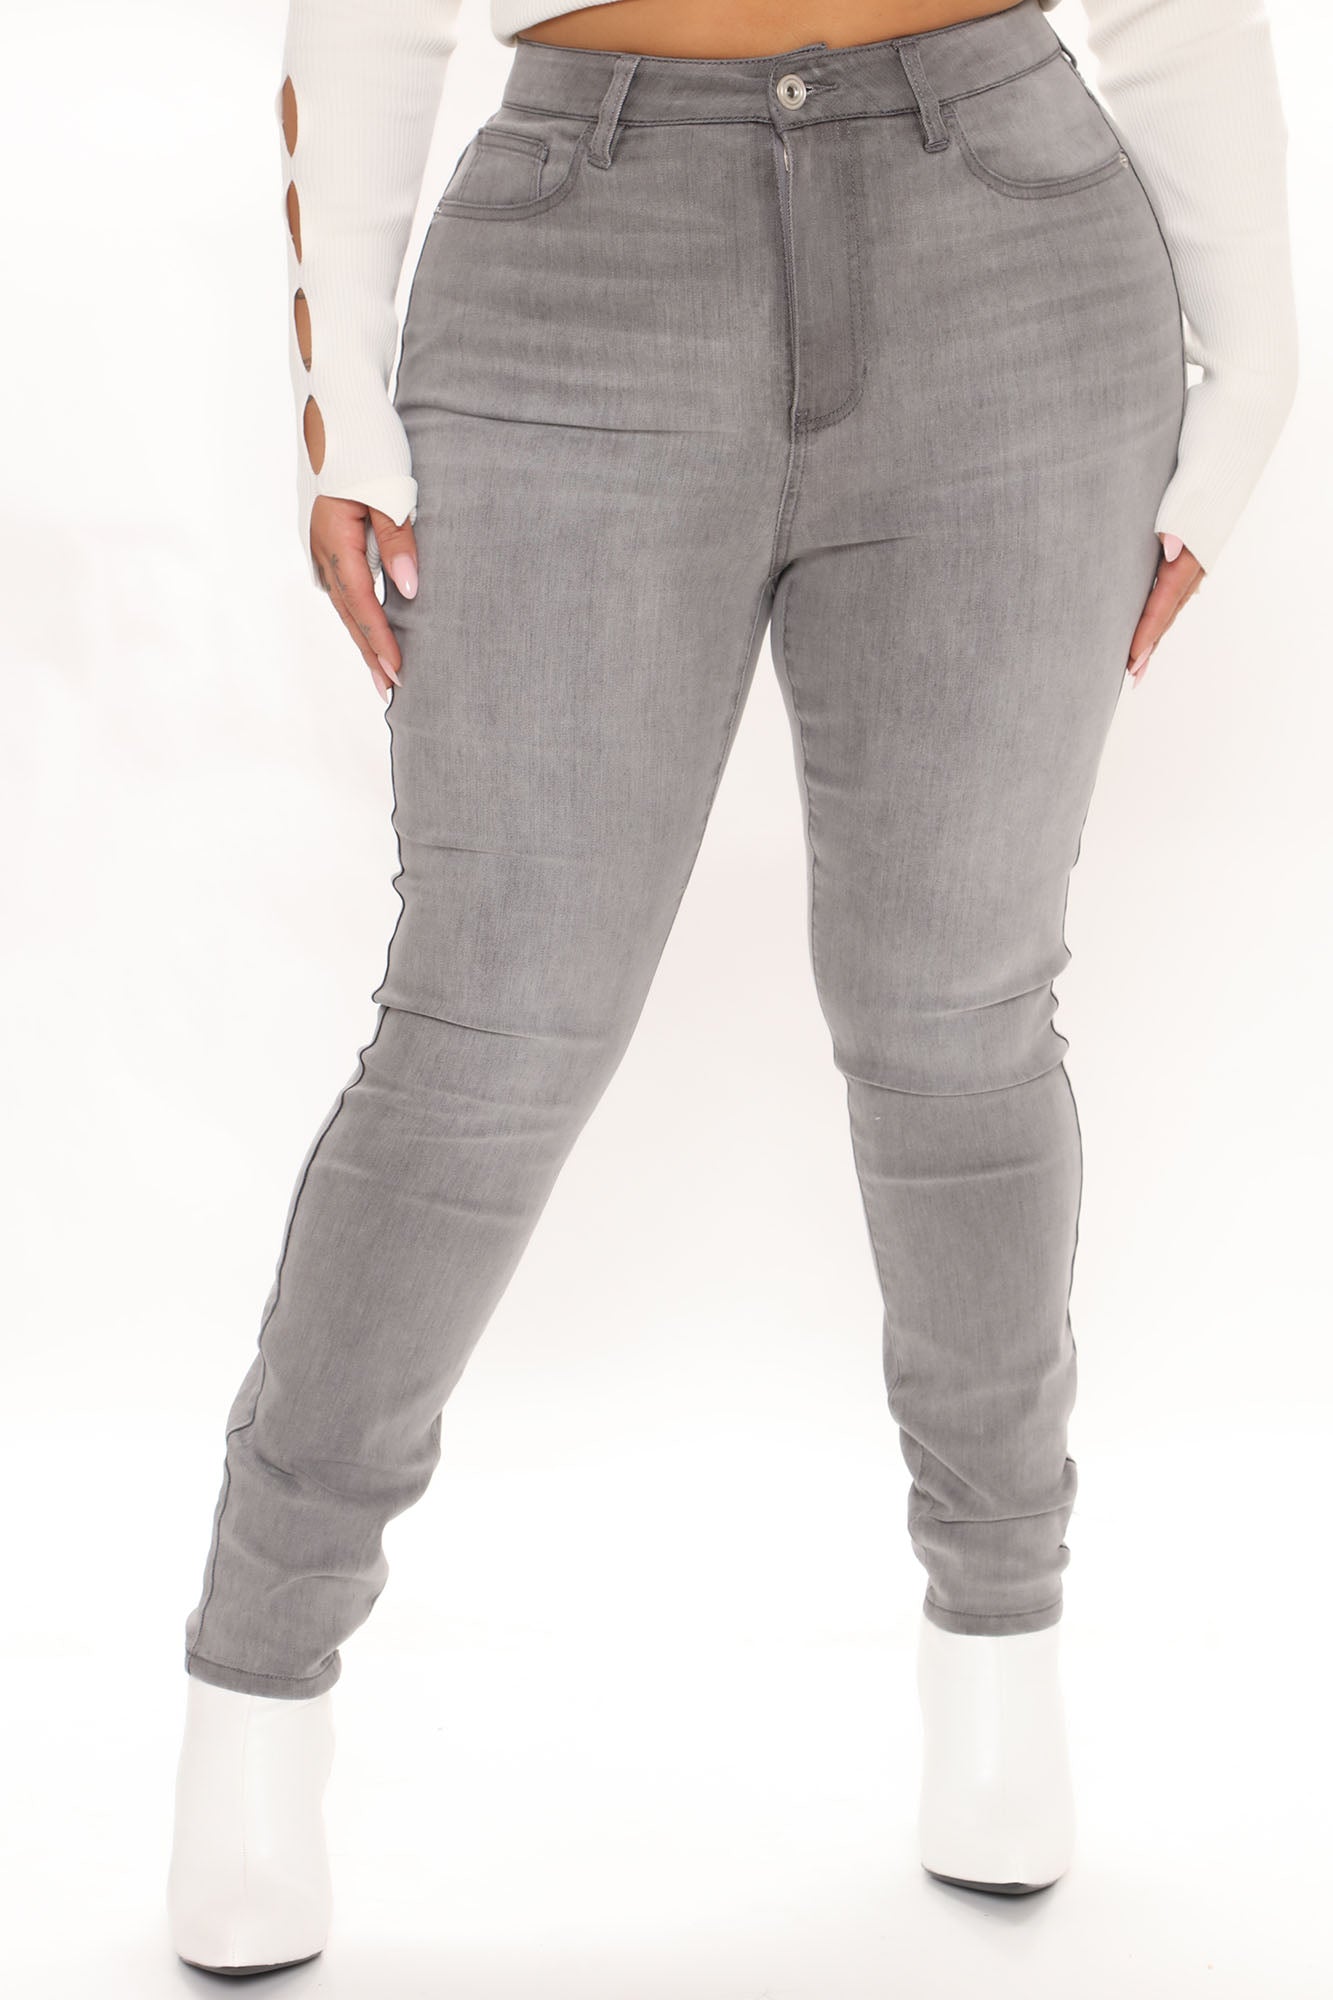 Lights Out High Rise Booty Lifting Skinny Jeans - Grey